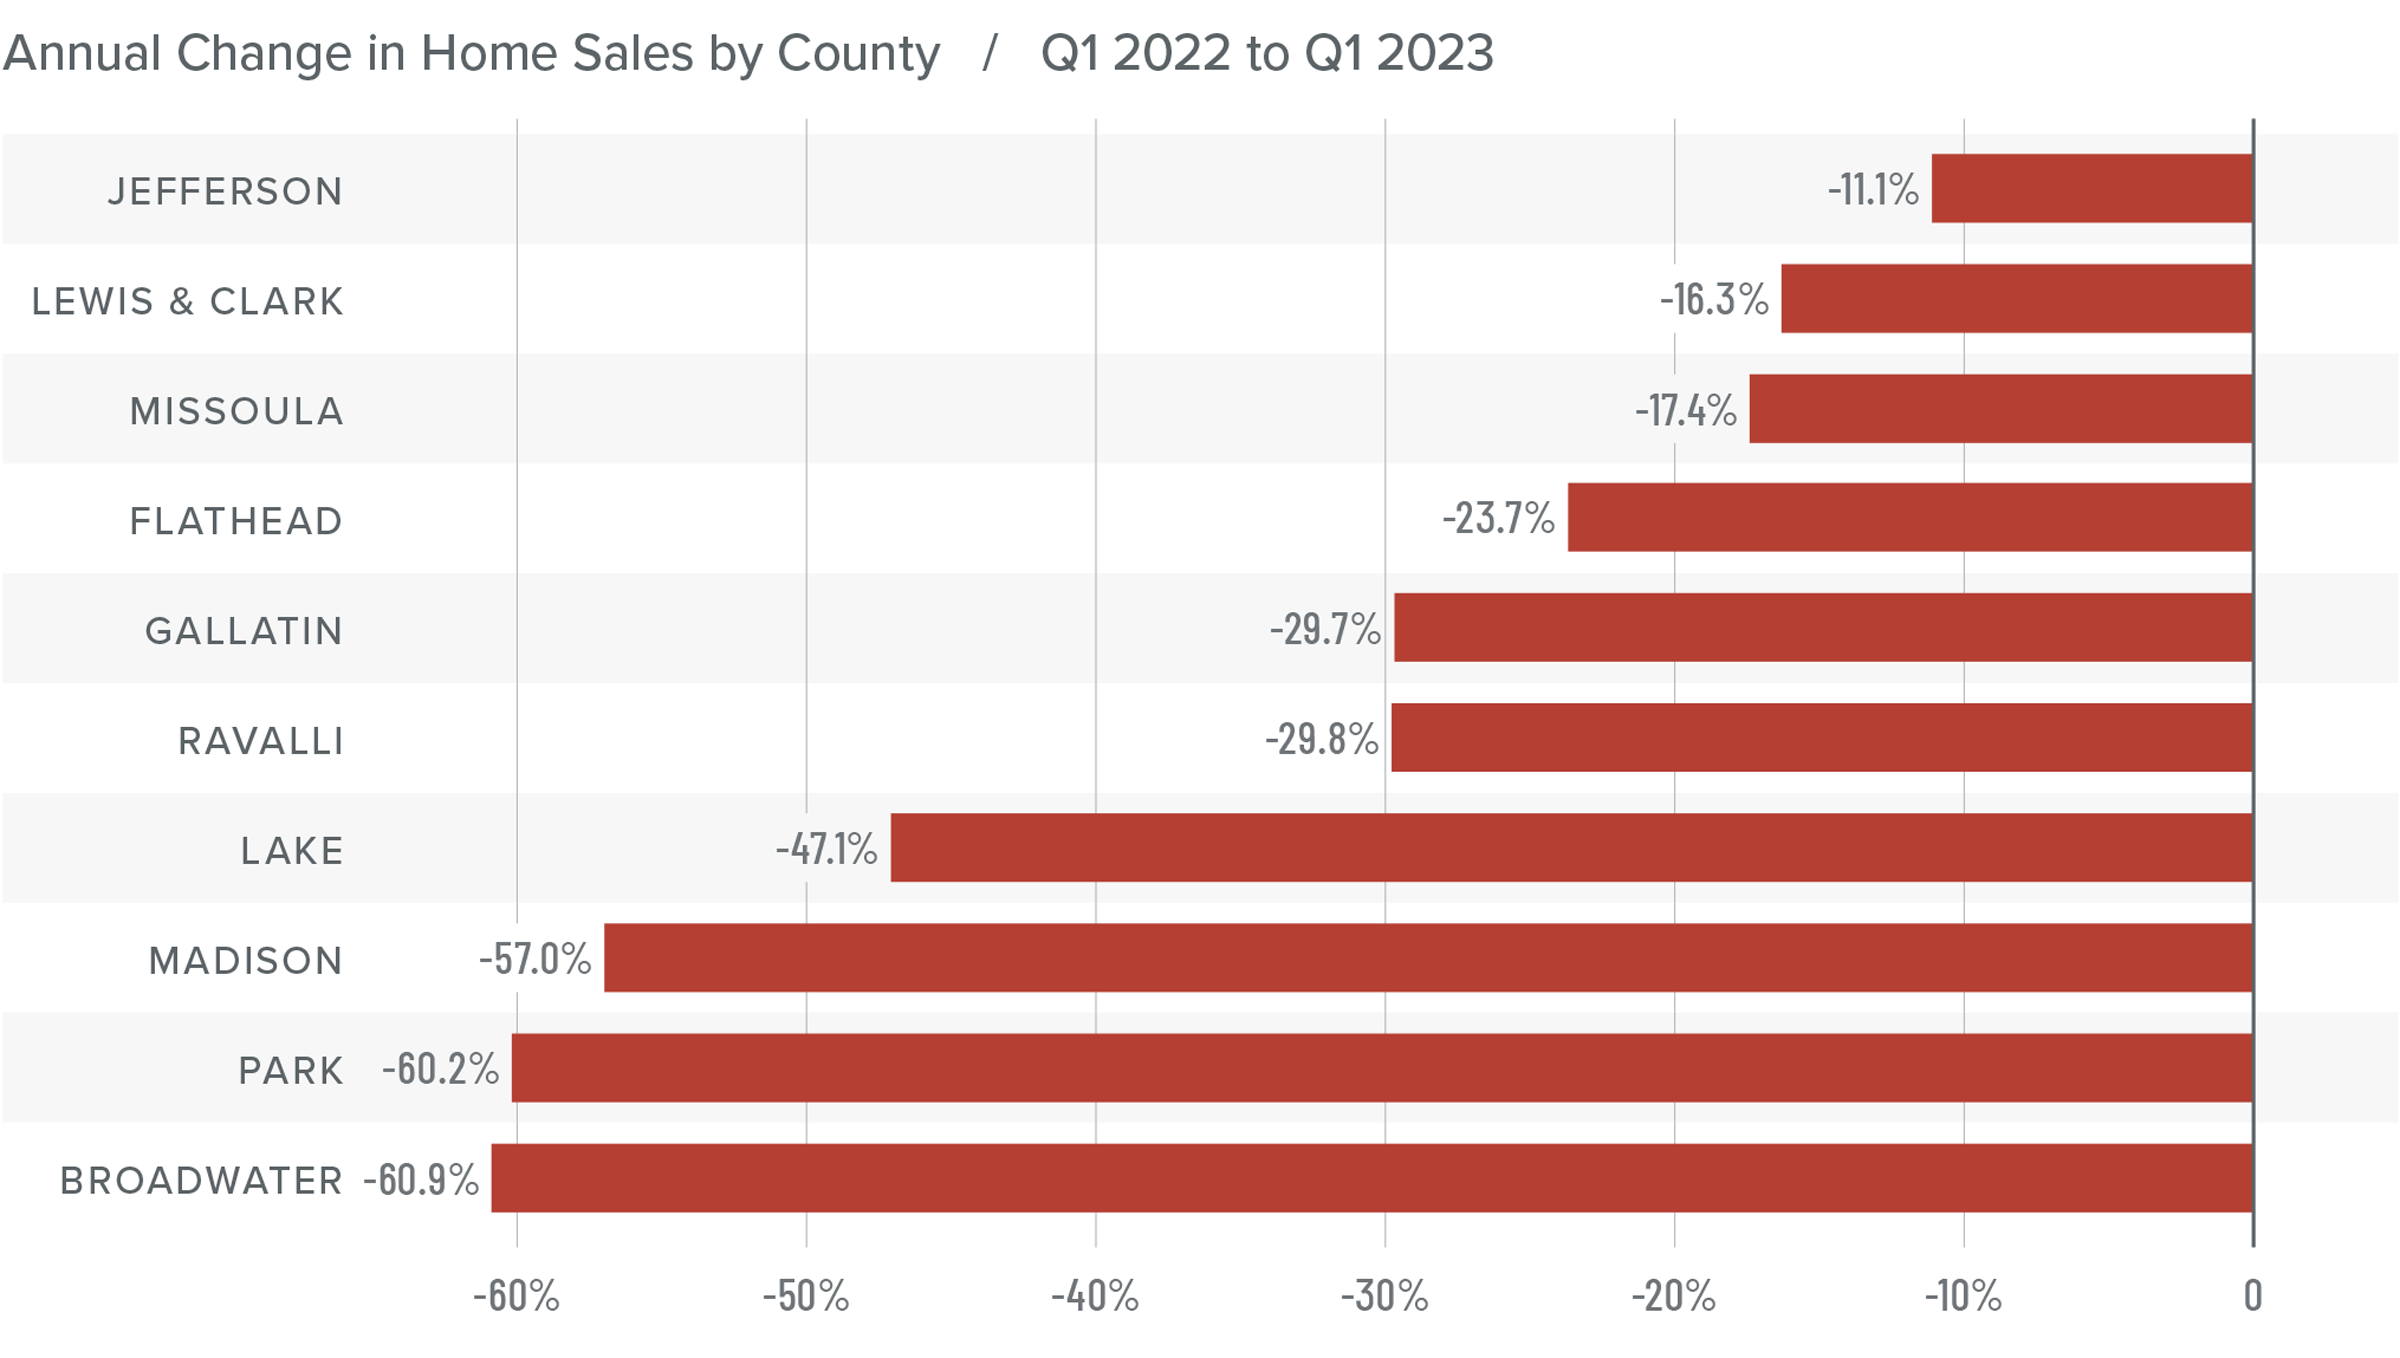 A bar graph showing the annual change in home sales for various counties in Montana from Q1 2022 to Q1 2023. All counties have a negative percentage year-over-year change. Here are the totals: Jefferson at -11.1%, Lewis & Clark at -16.3%, Missoula -17.4%, Flathead -23.7%, Gallatin -29.7%, Ravalli -29.8%, Lake -47.1%, Madison -57%, Park -60.2%, and Broadwater -60.9%.